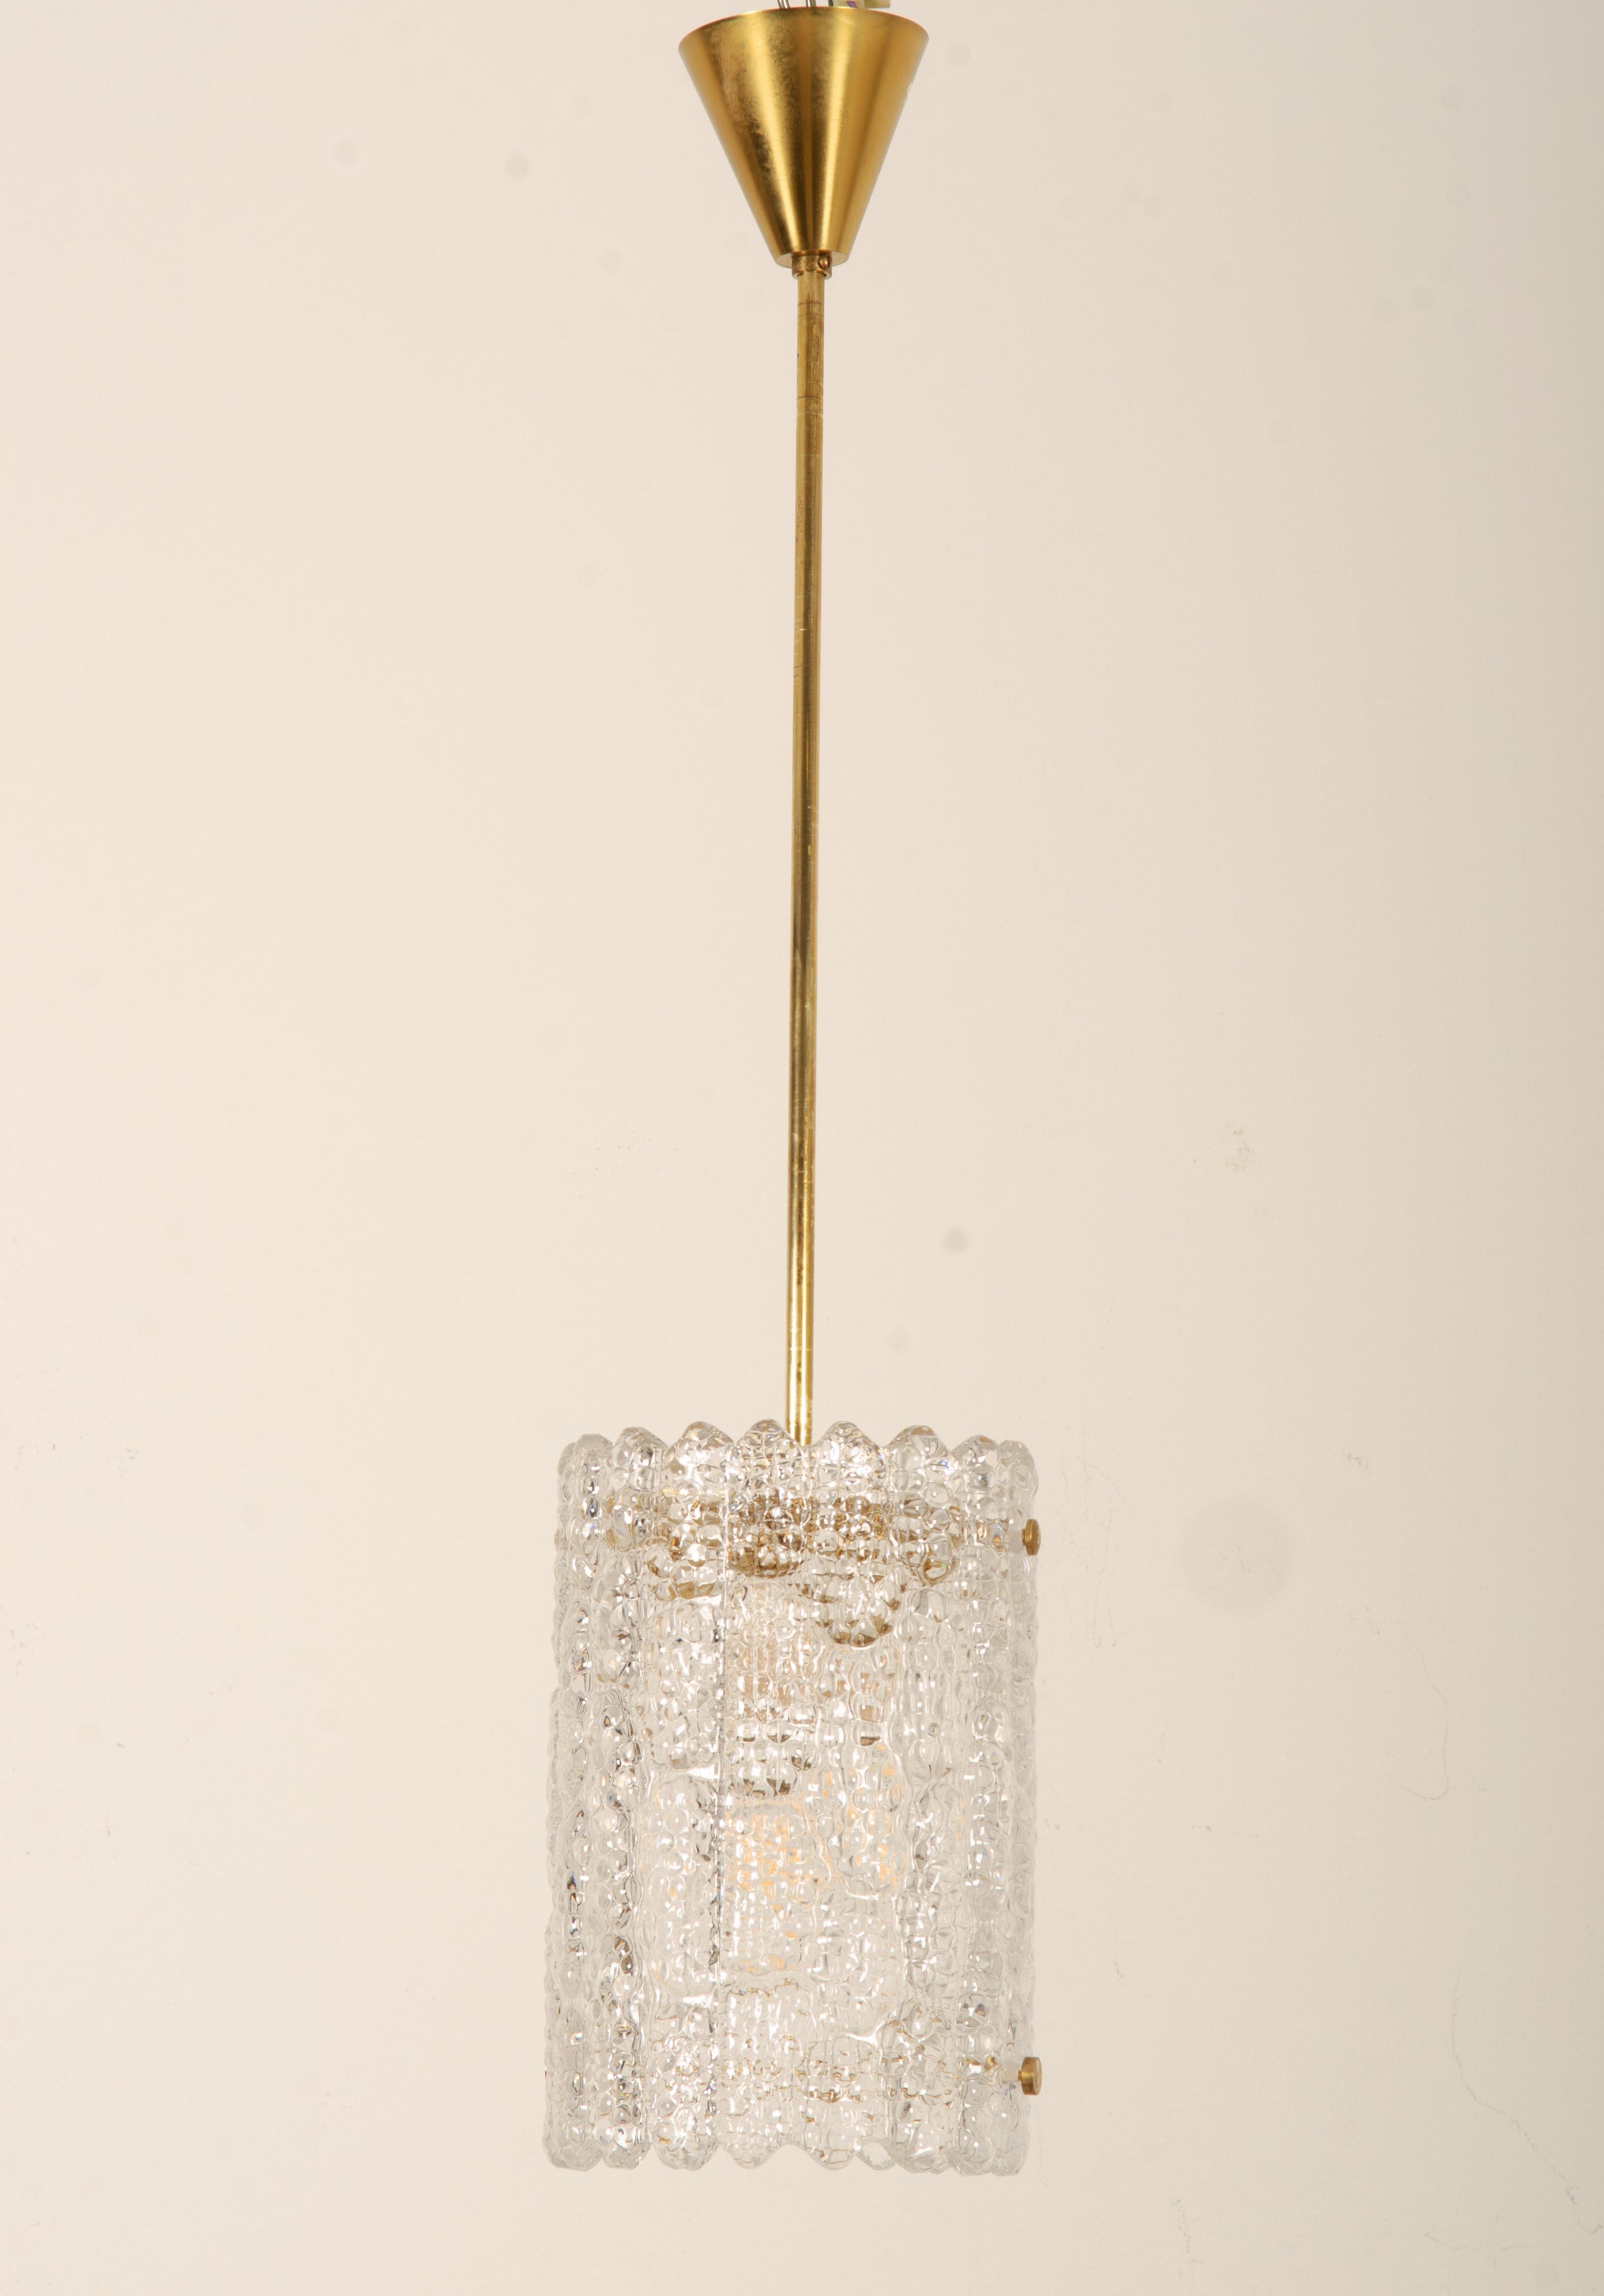 Mid-20th Century Crystal Pendant by Carl Fagerlund for Orrefors, Sweden For Sale